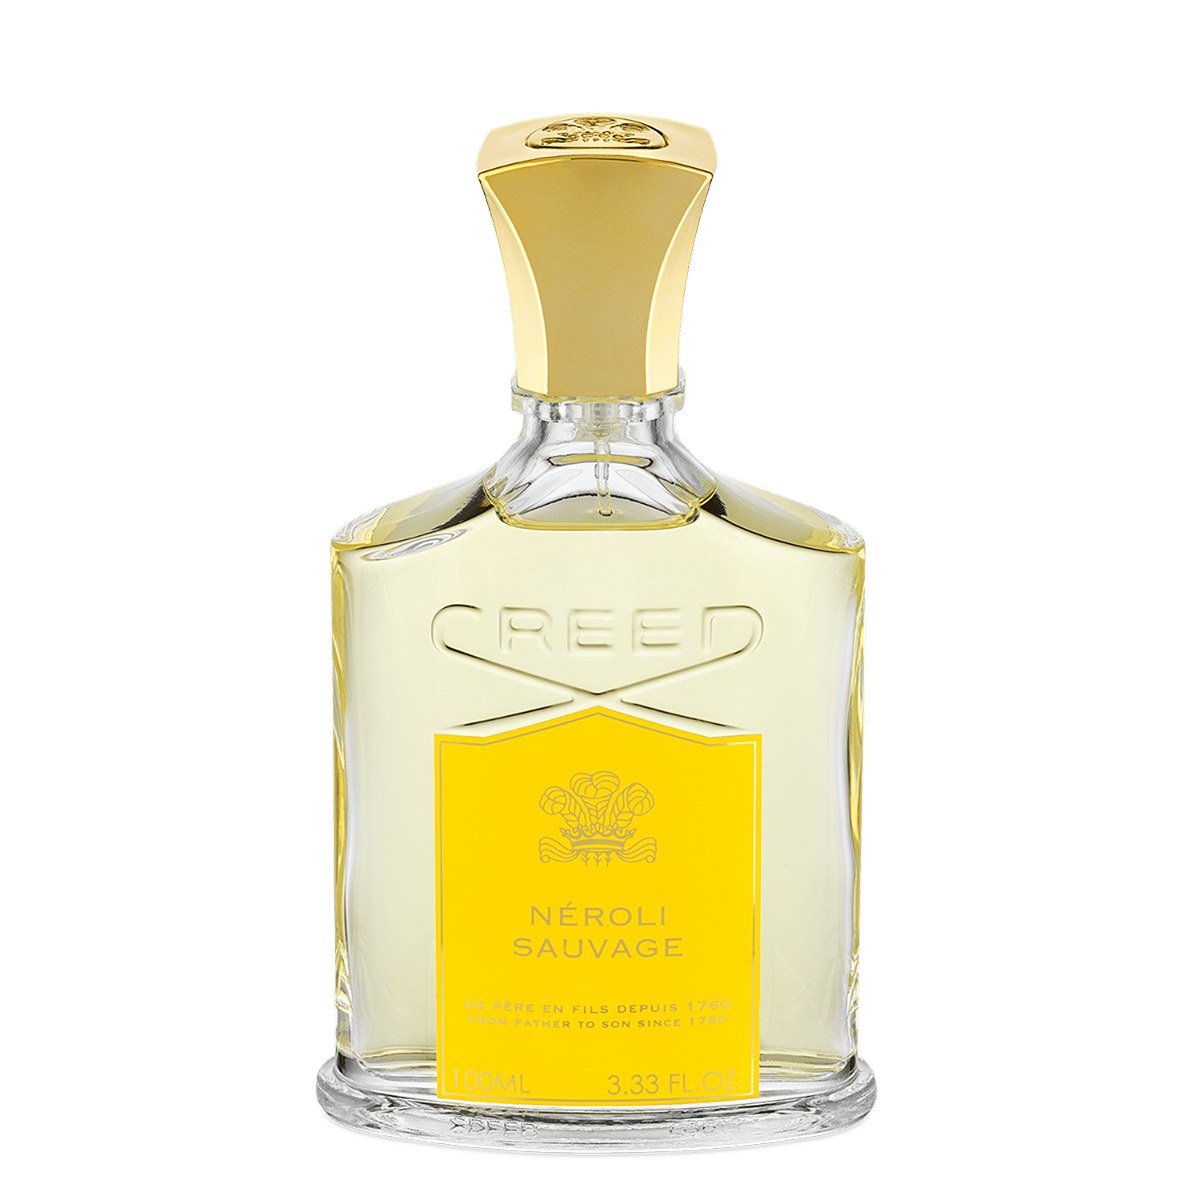 An elegant bottle of Creed's Neroli Sauvage 100ml cologne with floral-citrus notes and ancient ingredients.